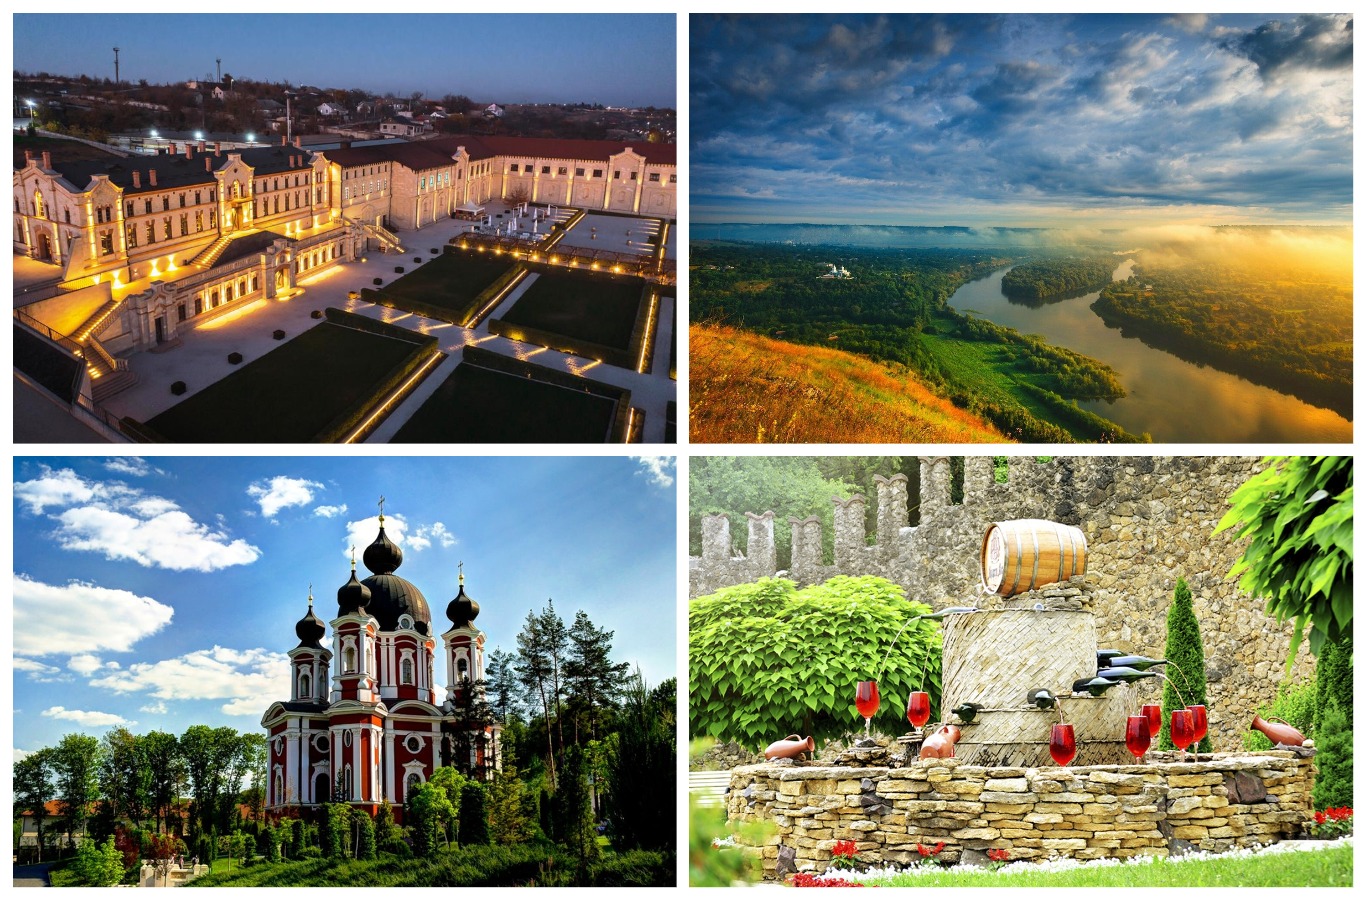 Discover Moldova: Today we will answer frequent questions about our country’s must-visit places